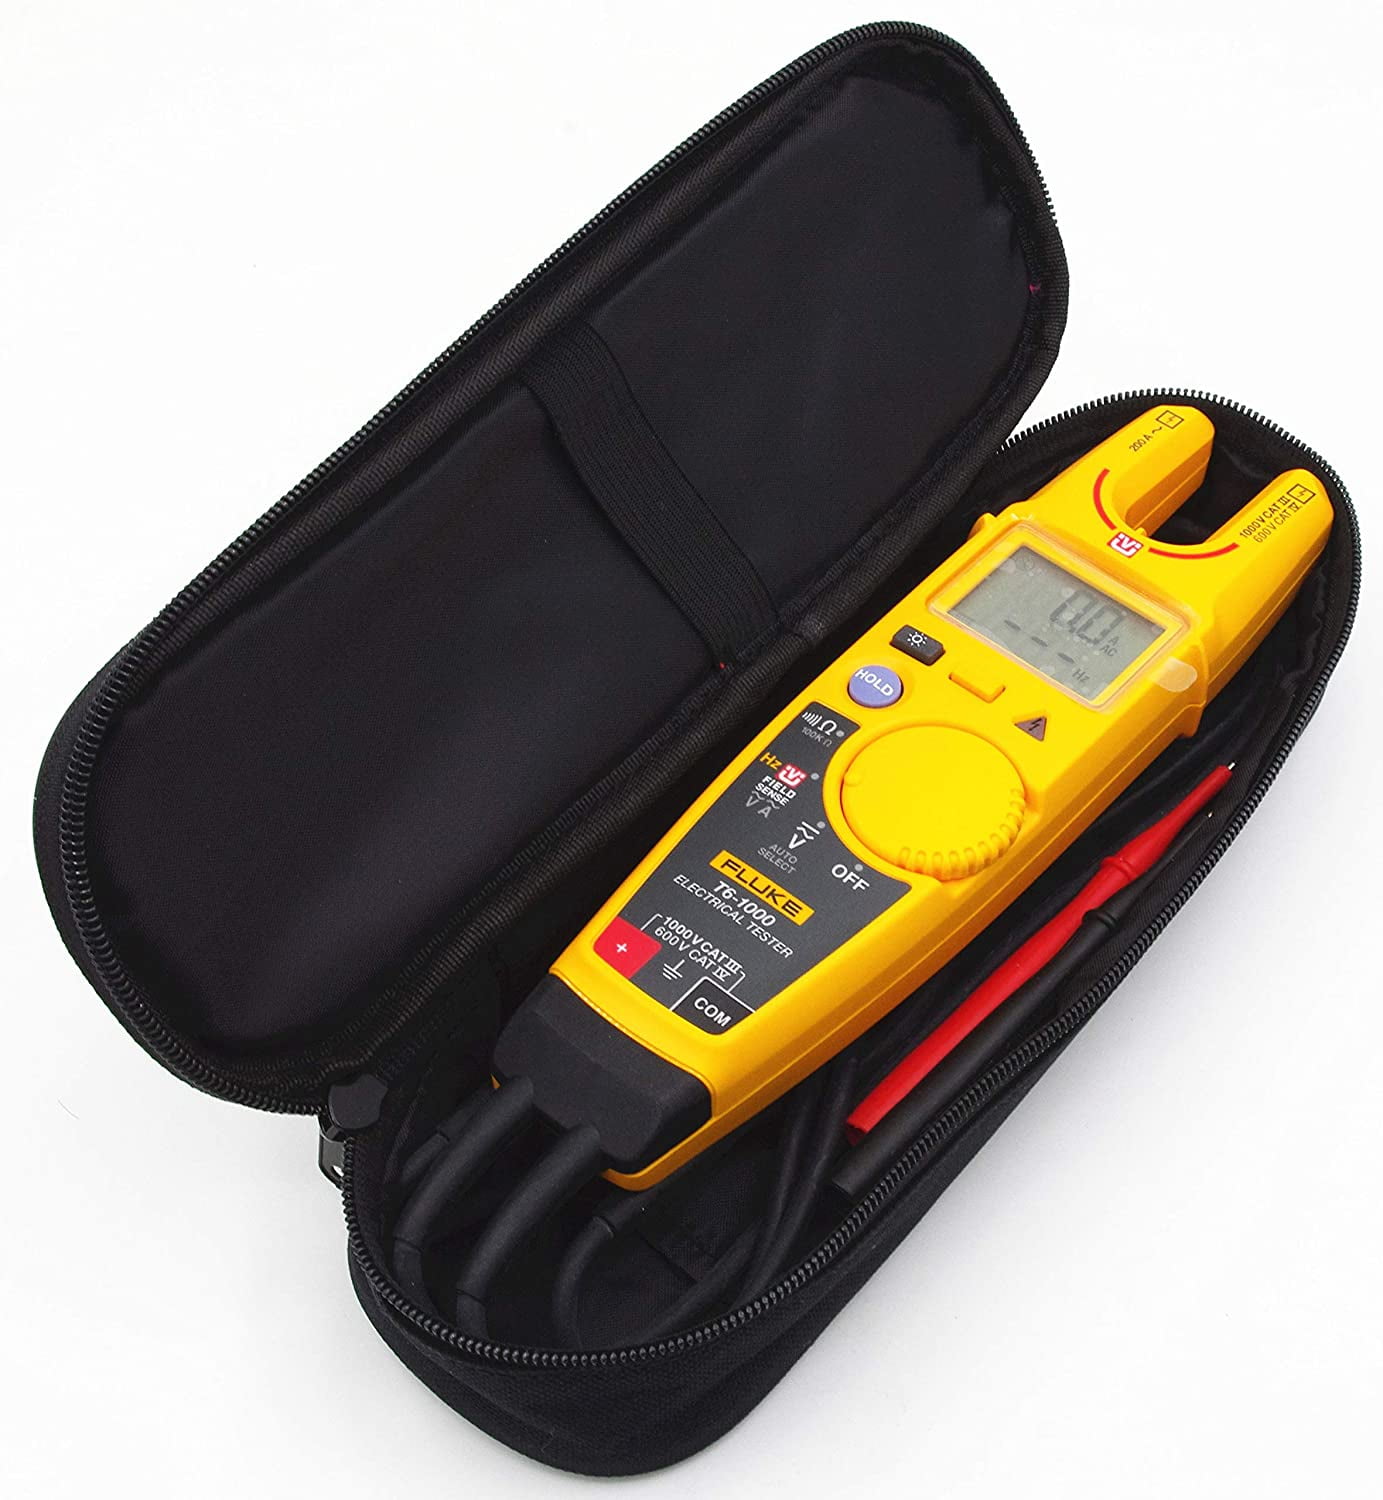 Fluke T5-1000 1000 Voltage Current Electrical Tester Clamp Meter  FREE T-SHIRT 